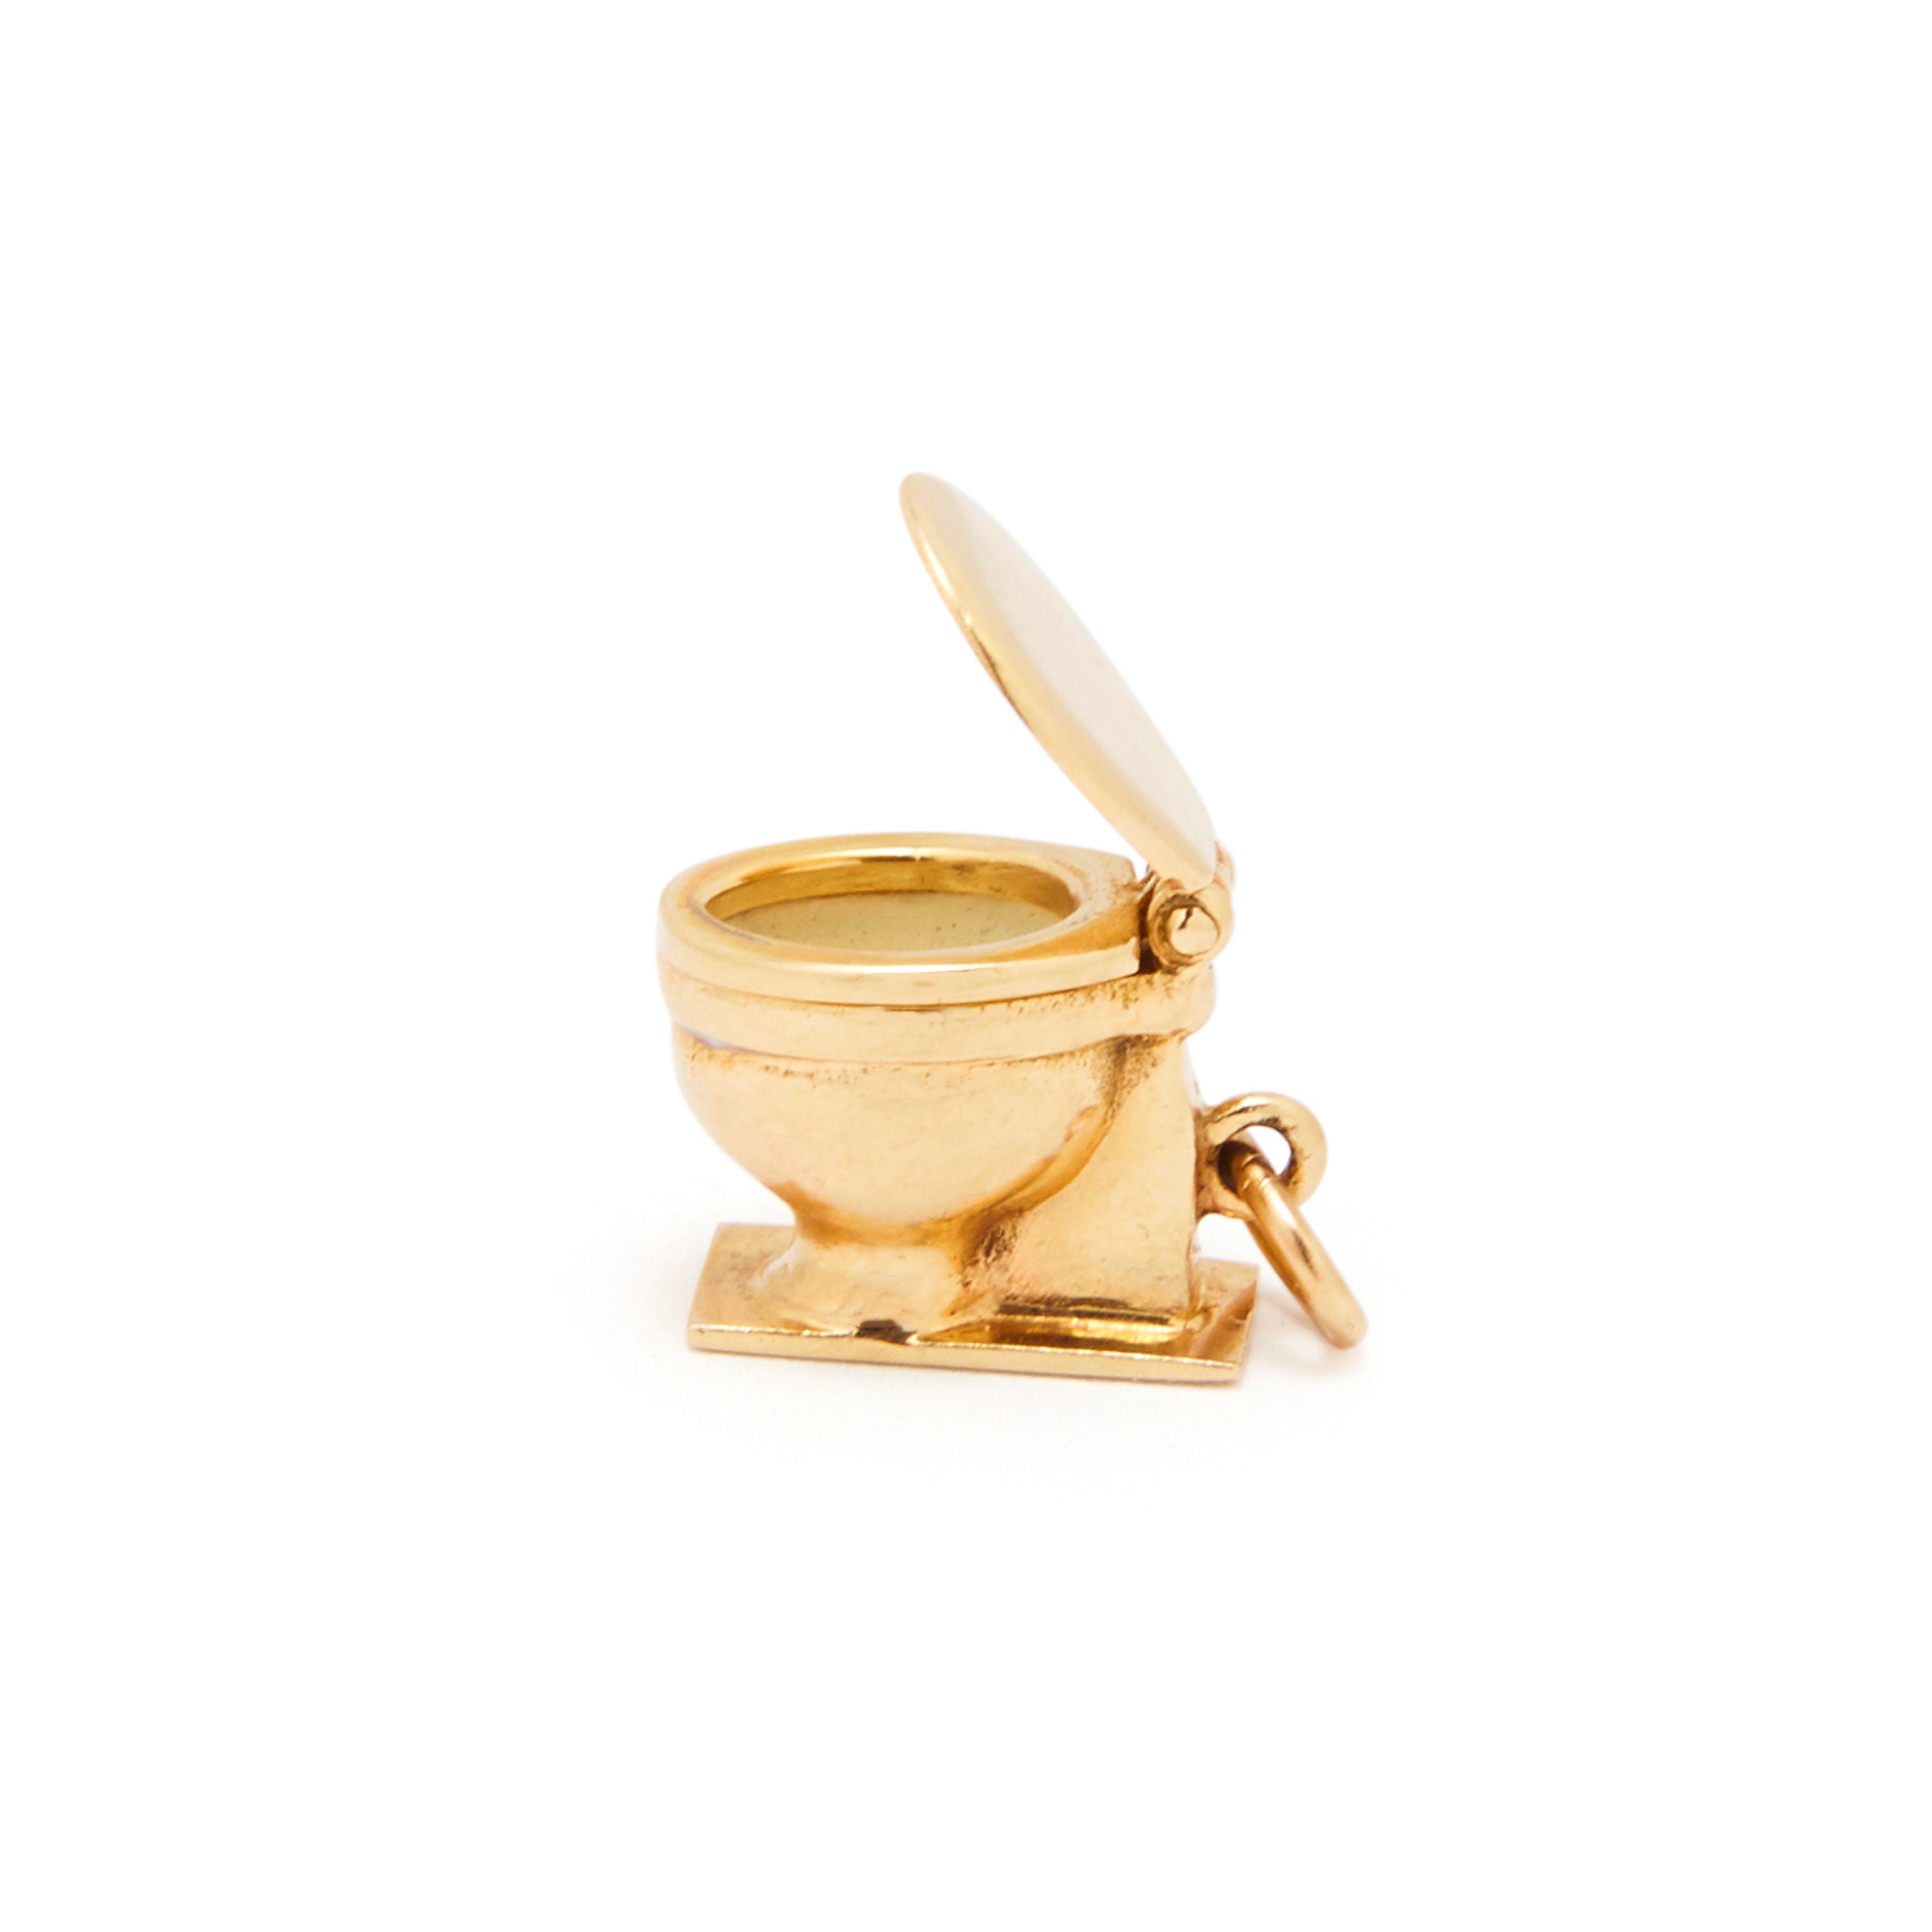 Movable 14K Gold And Enamel Toilet Charm